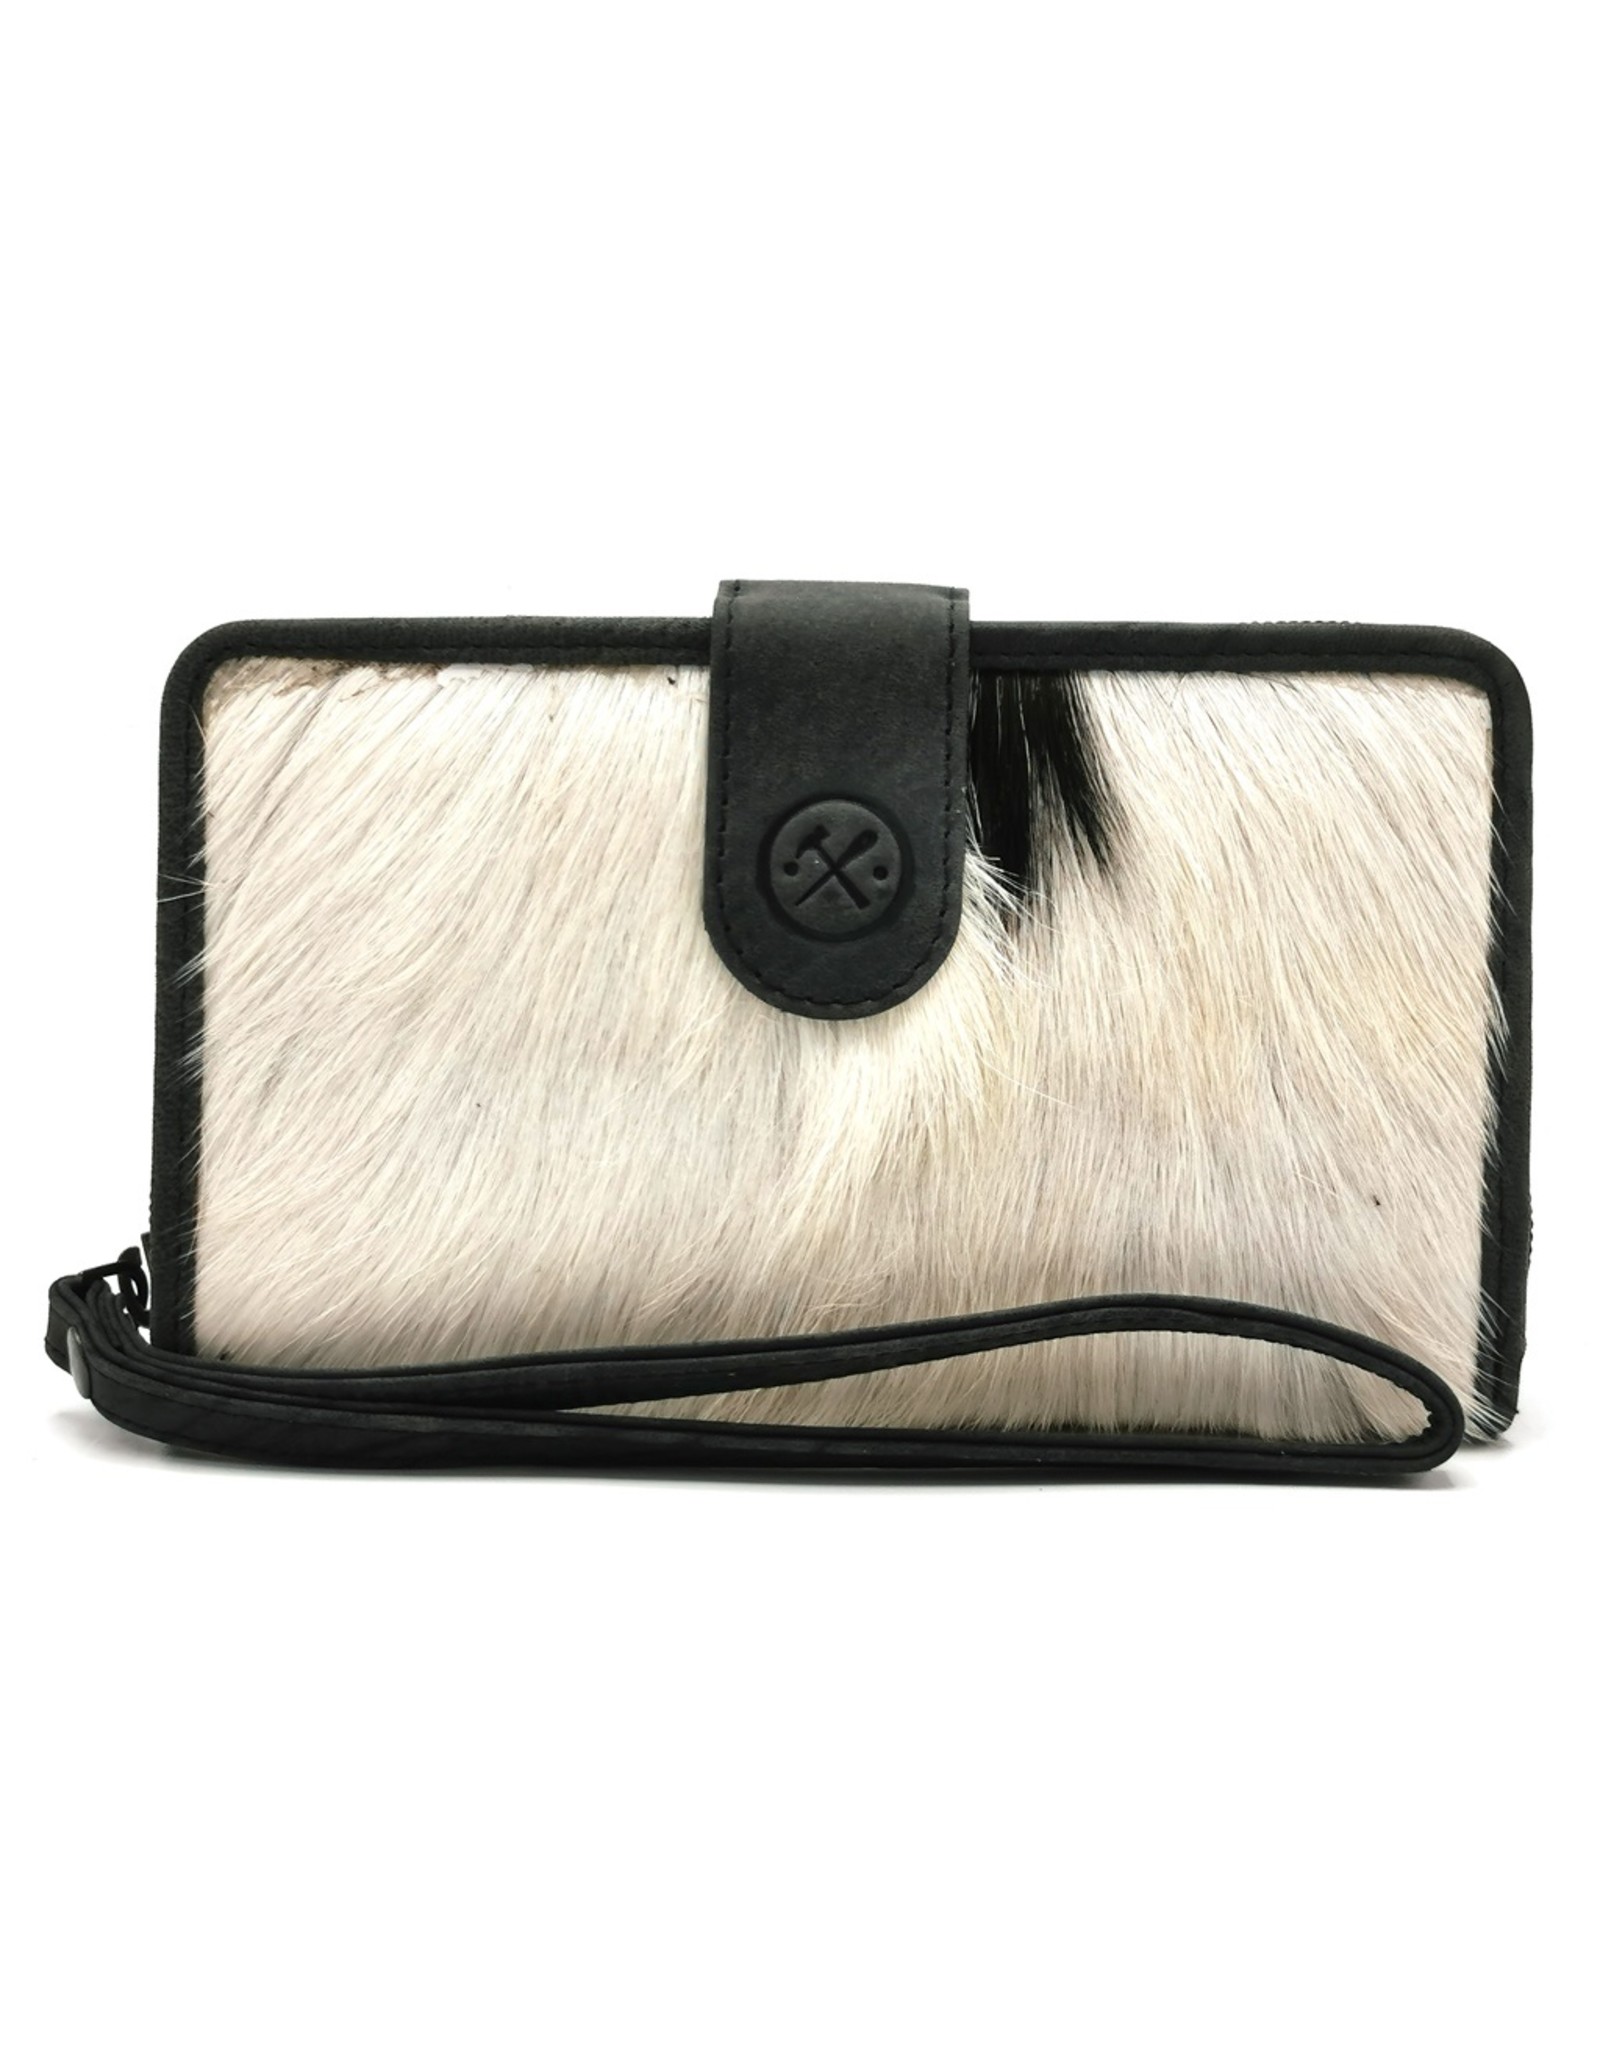 Hide & Stitches Leather Wallets - Leather Purse with Cowhide black-white